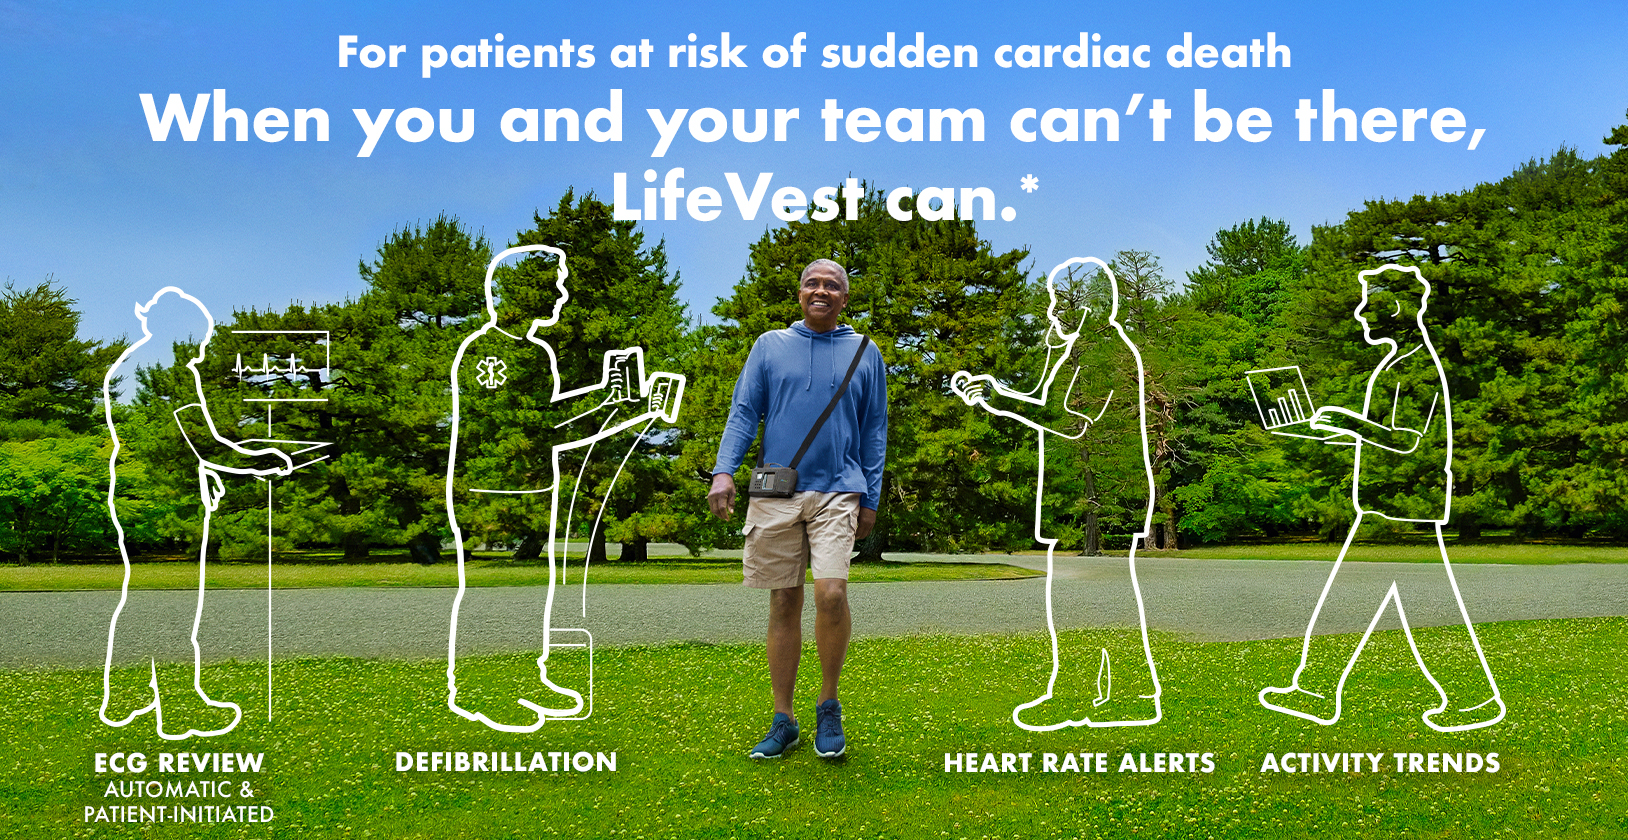 For patients at risk of sudden cardiac death, when you and your team can’t be there, LifeVest can.